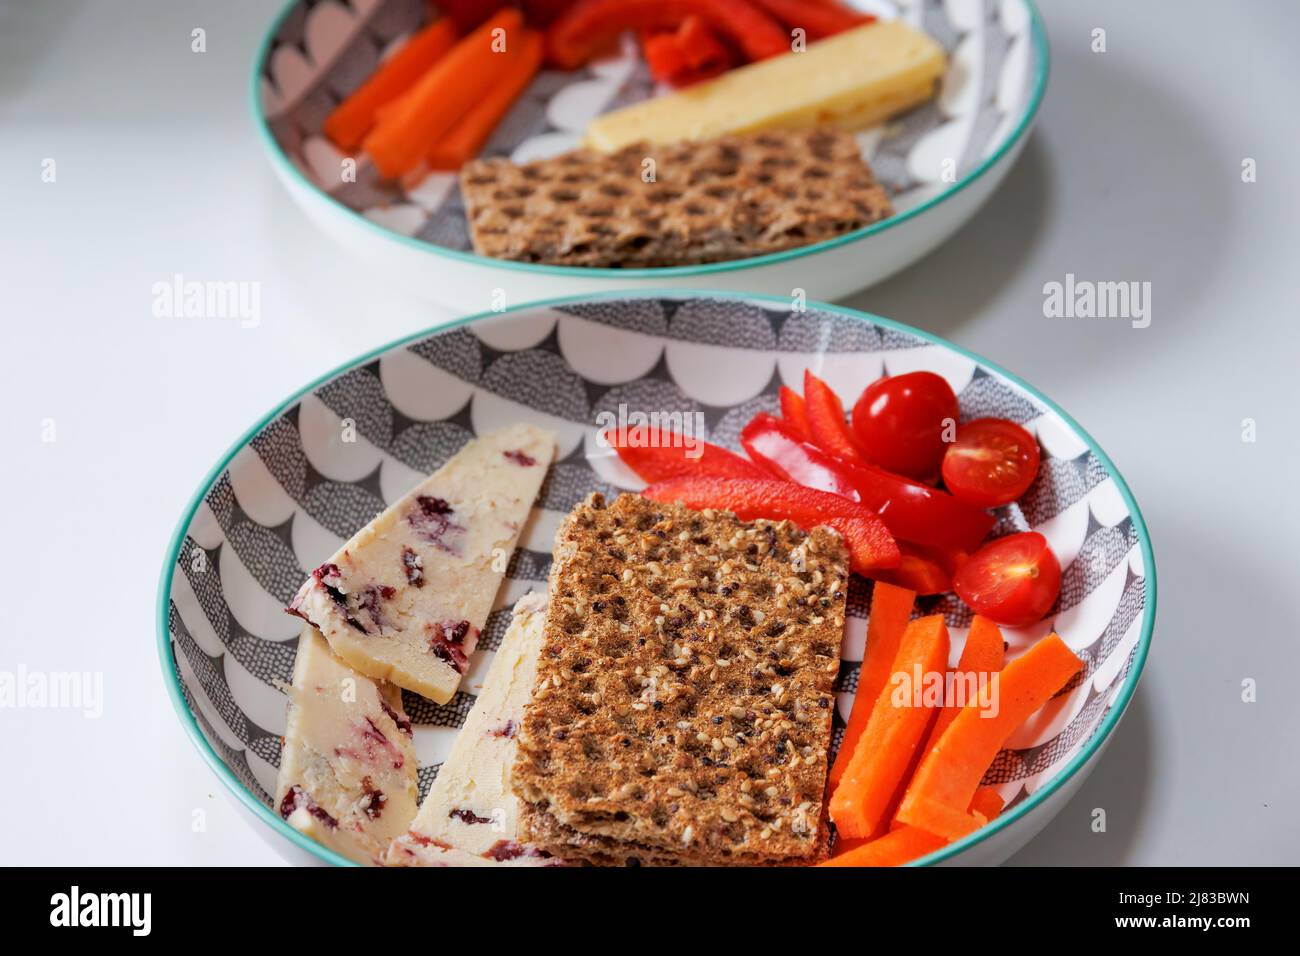 Healthy Rye crispbreads, vegetables and cheese in a bowl Stock Photo